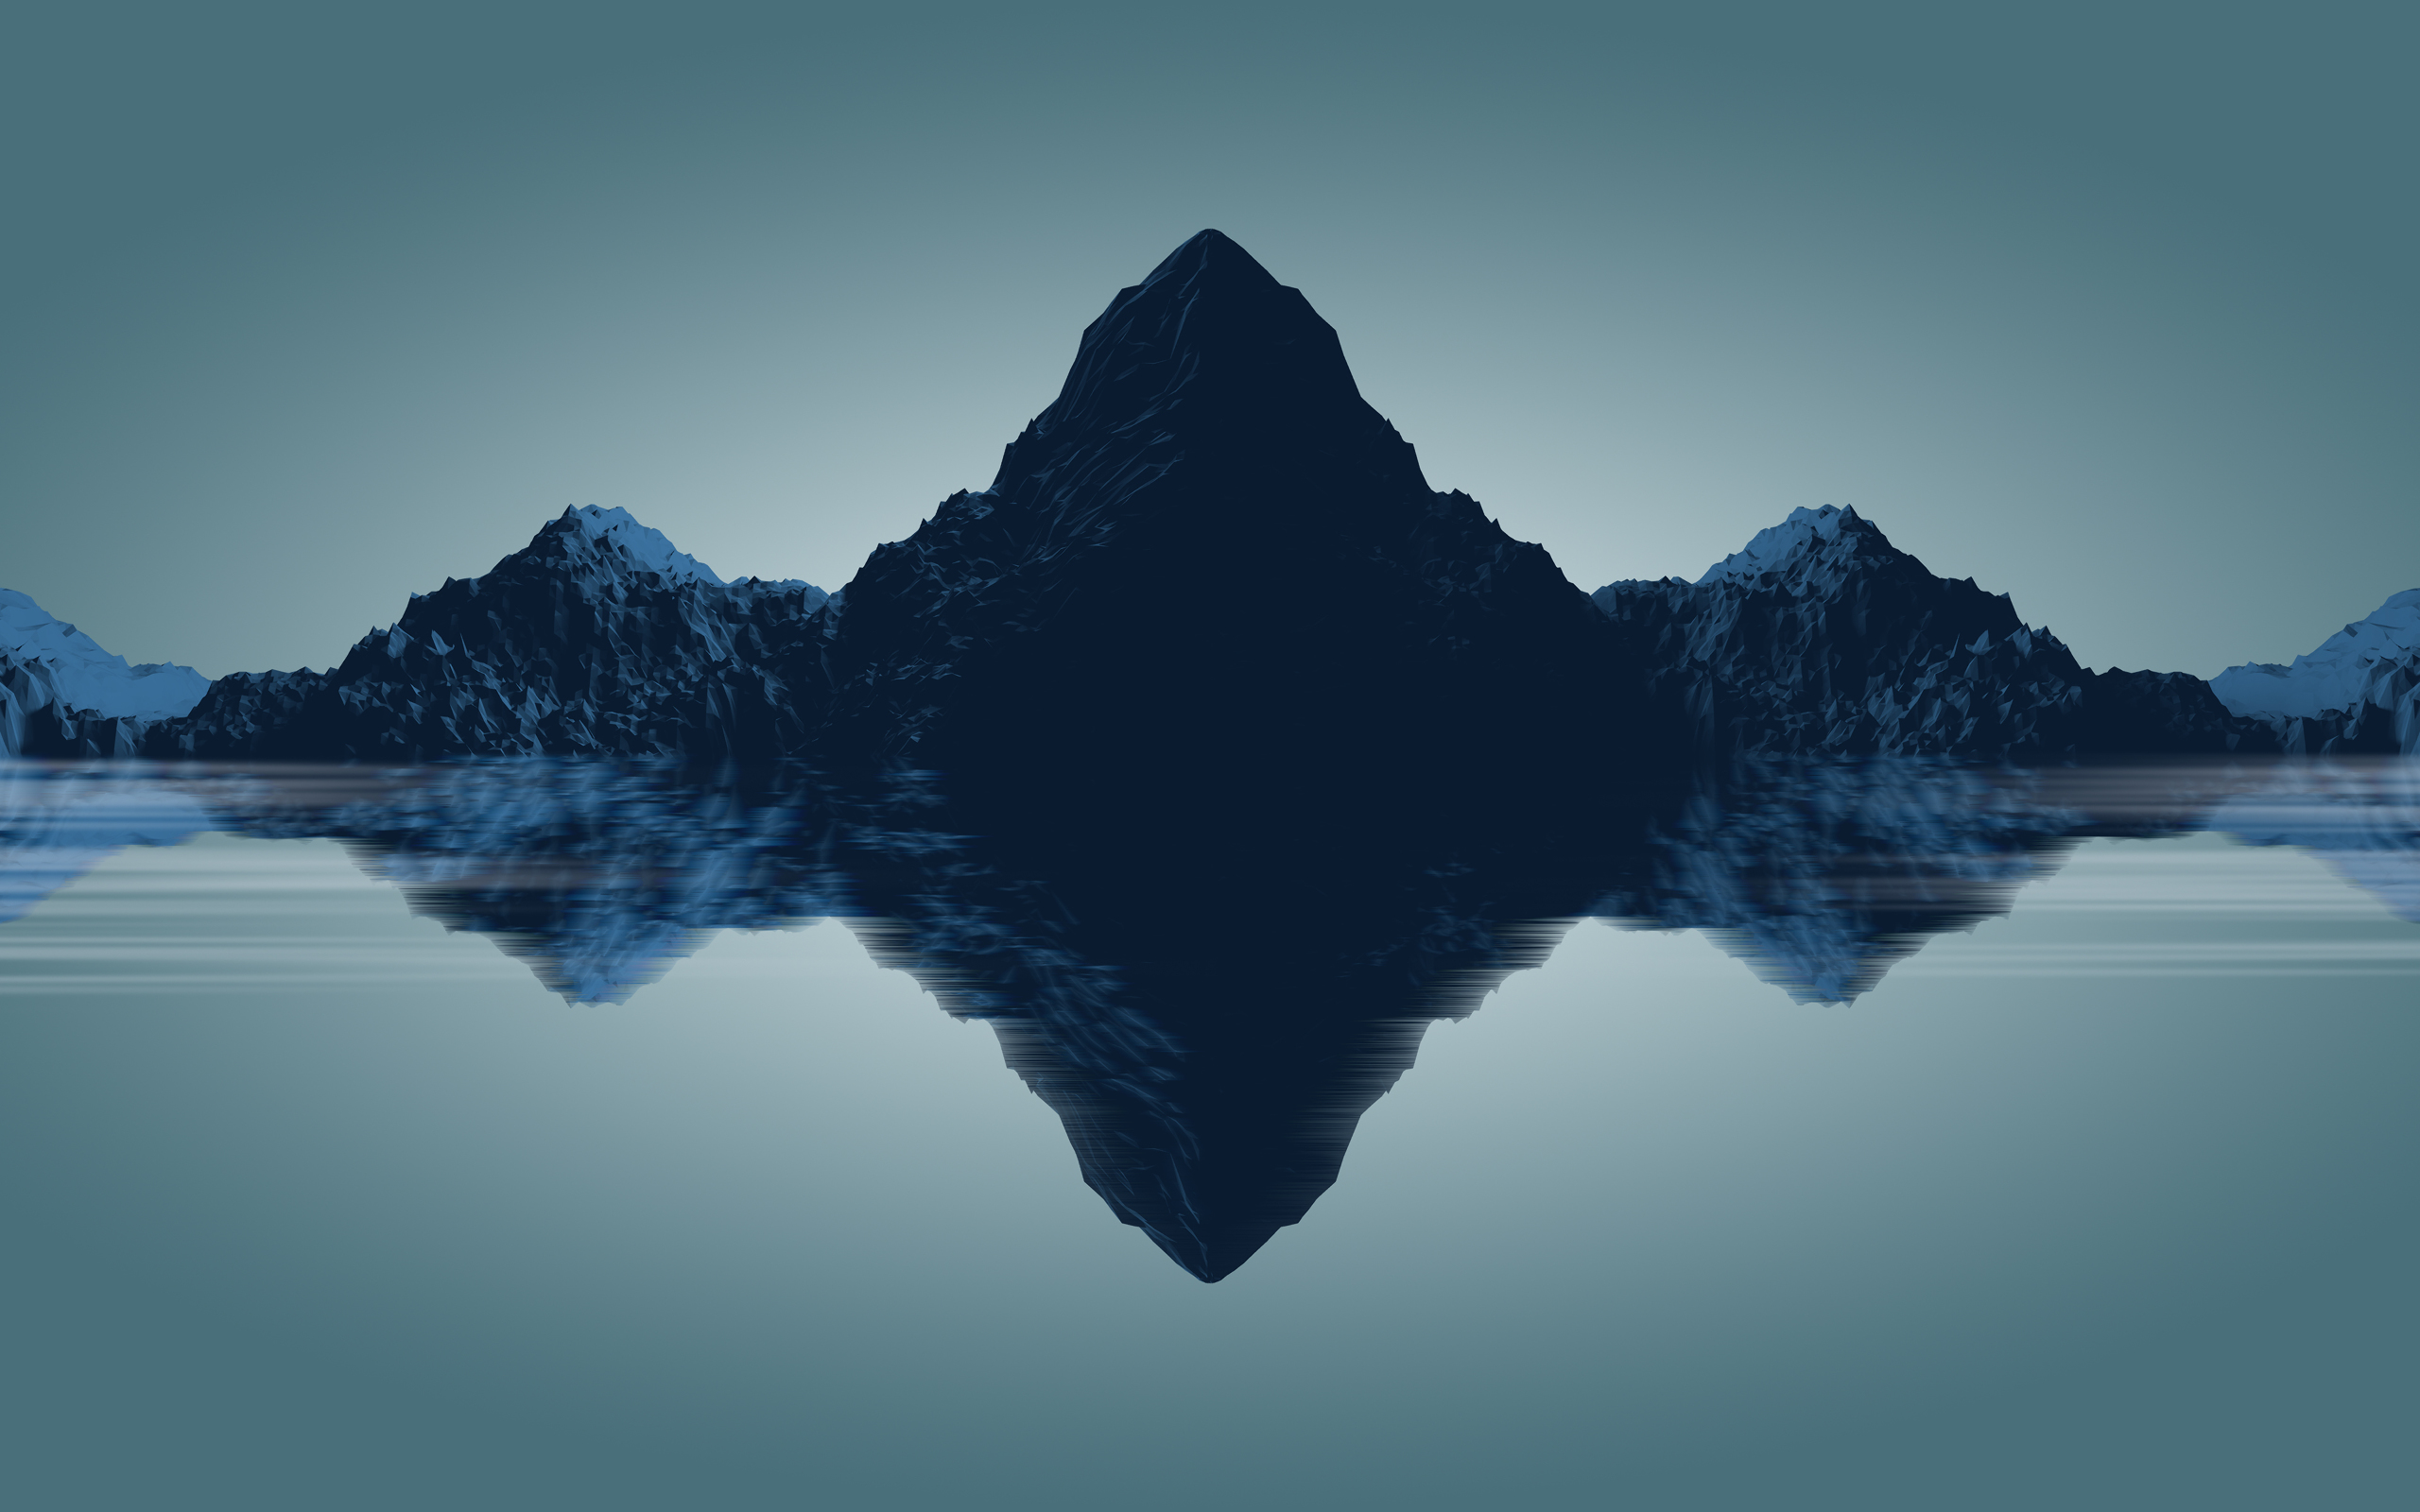 General 2560x1600 nature mountains sea centered symmetry reflection low light